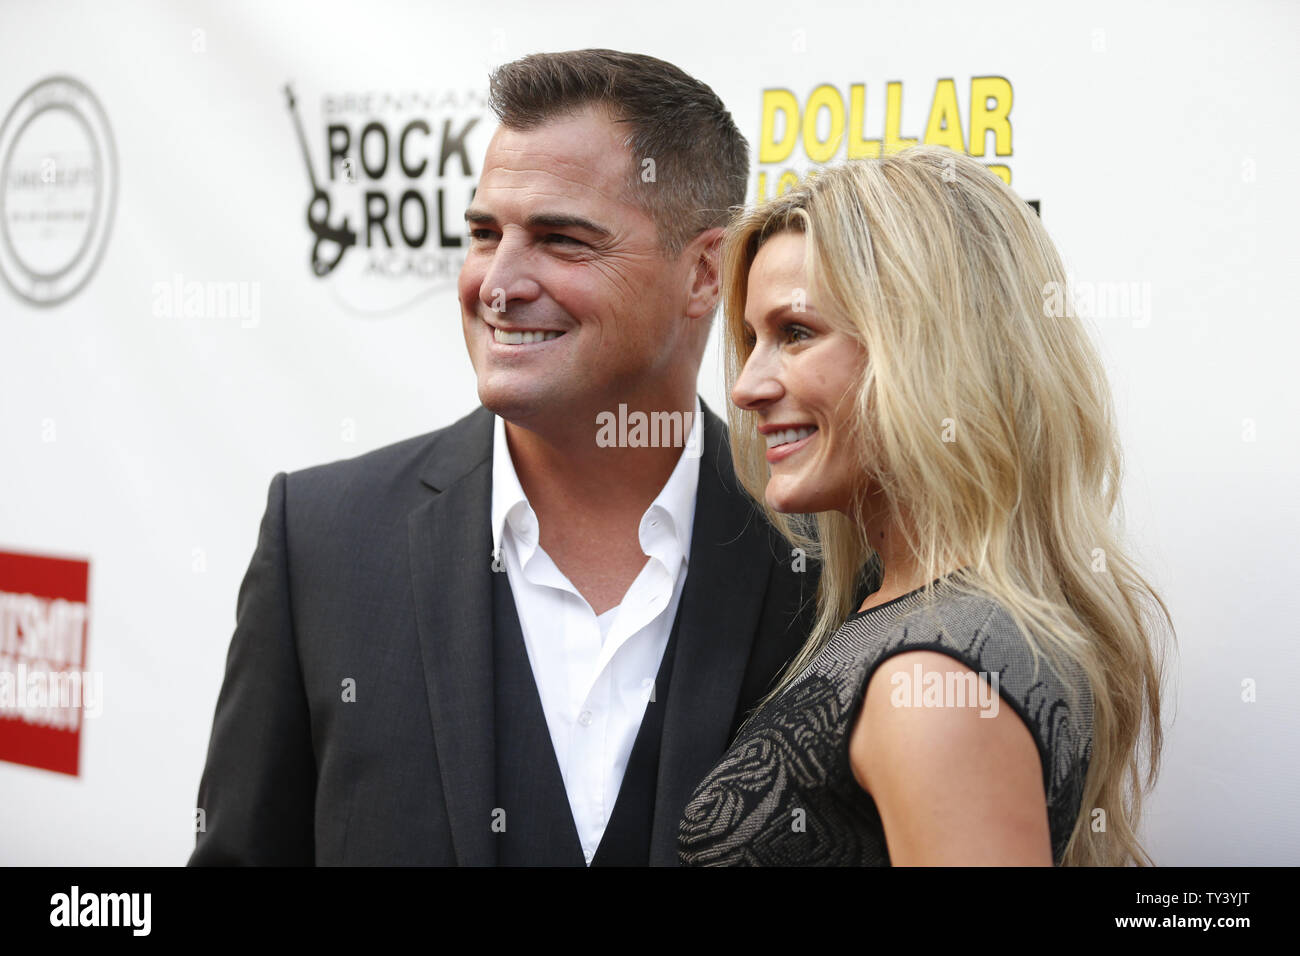 Cast member George Eads and wife Monika Casey attend the premiere of the motion picture thriller 'Gutshot Straight', at the Zanuck Theatre at Fox Studios in Los Angeles on August 12, 2013.  The crime story follows Eads’s Jack, a poker player who takes on Lang and Levine brothers in the Vegas underworld, with AnnaLynne McCord playing a femme fatale involved in the treachery.    UPI/Danny Moloshok Stock Photo